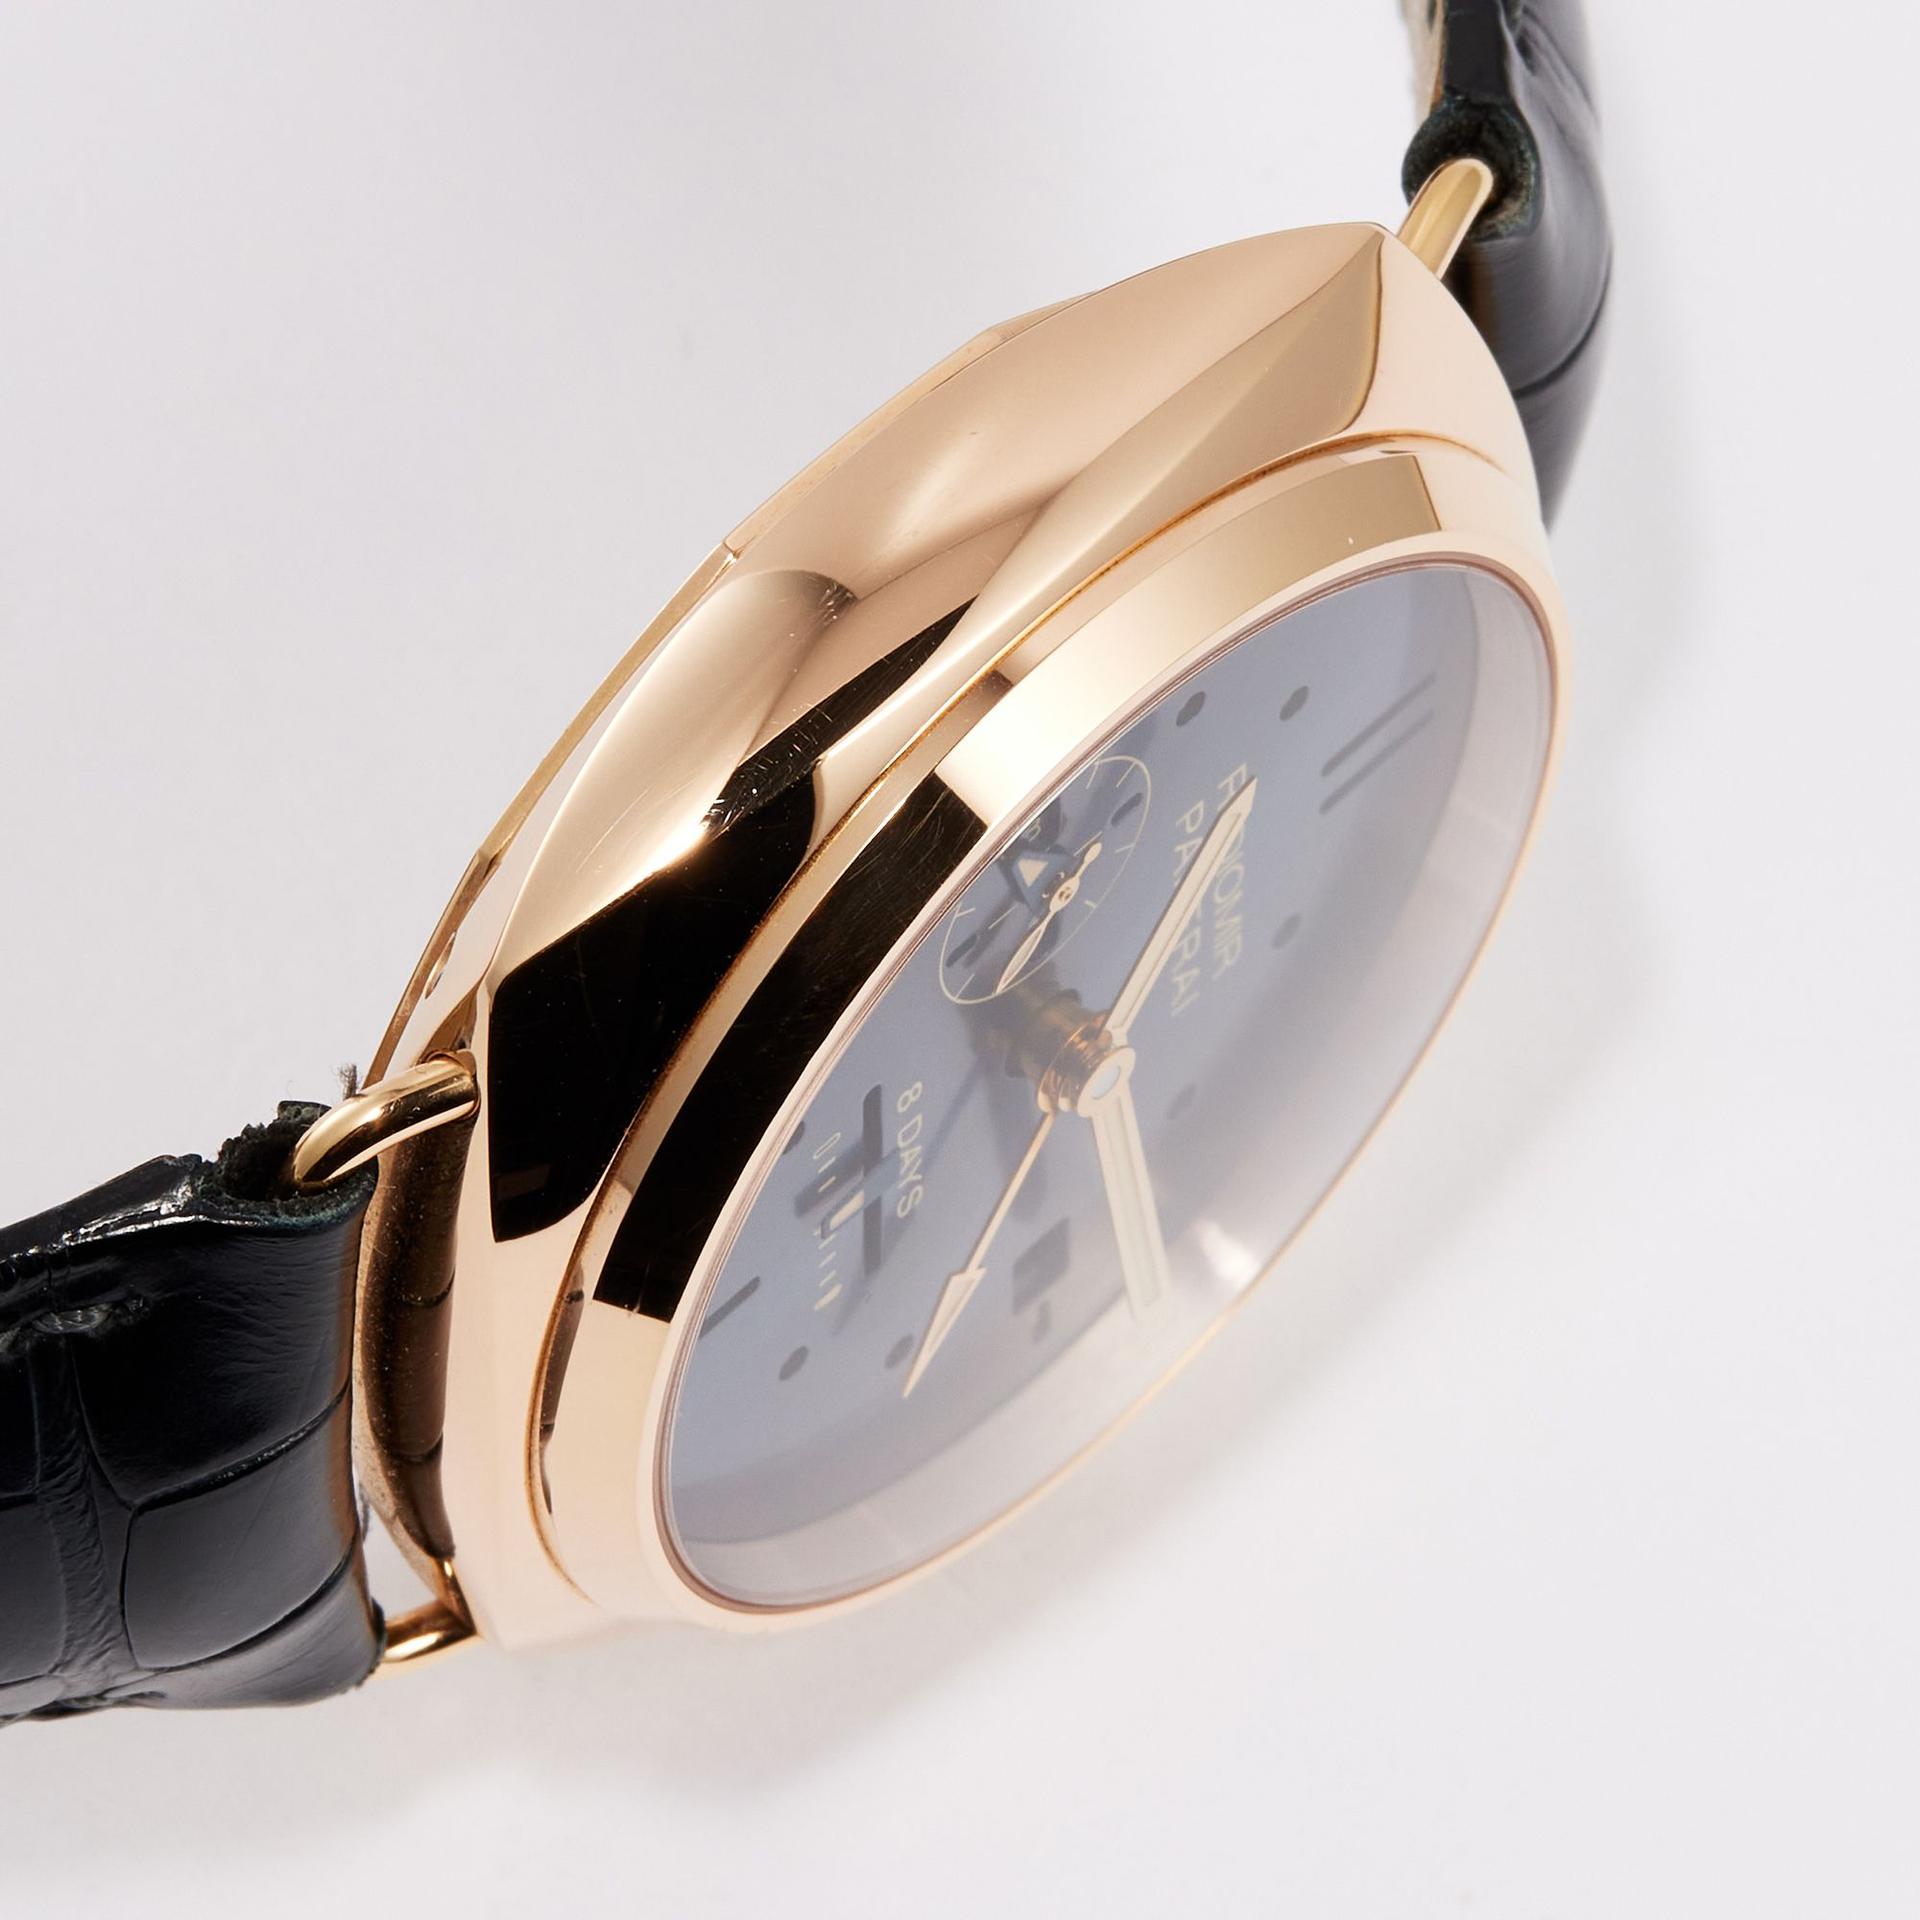 Radiomir 8 Days GMT Oro Rosso Rose Gold Blue Dial condition photo